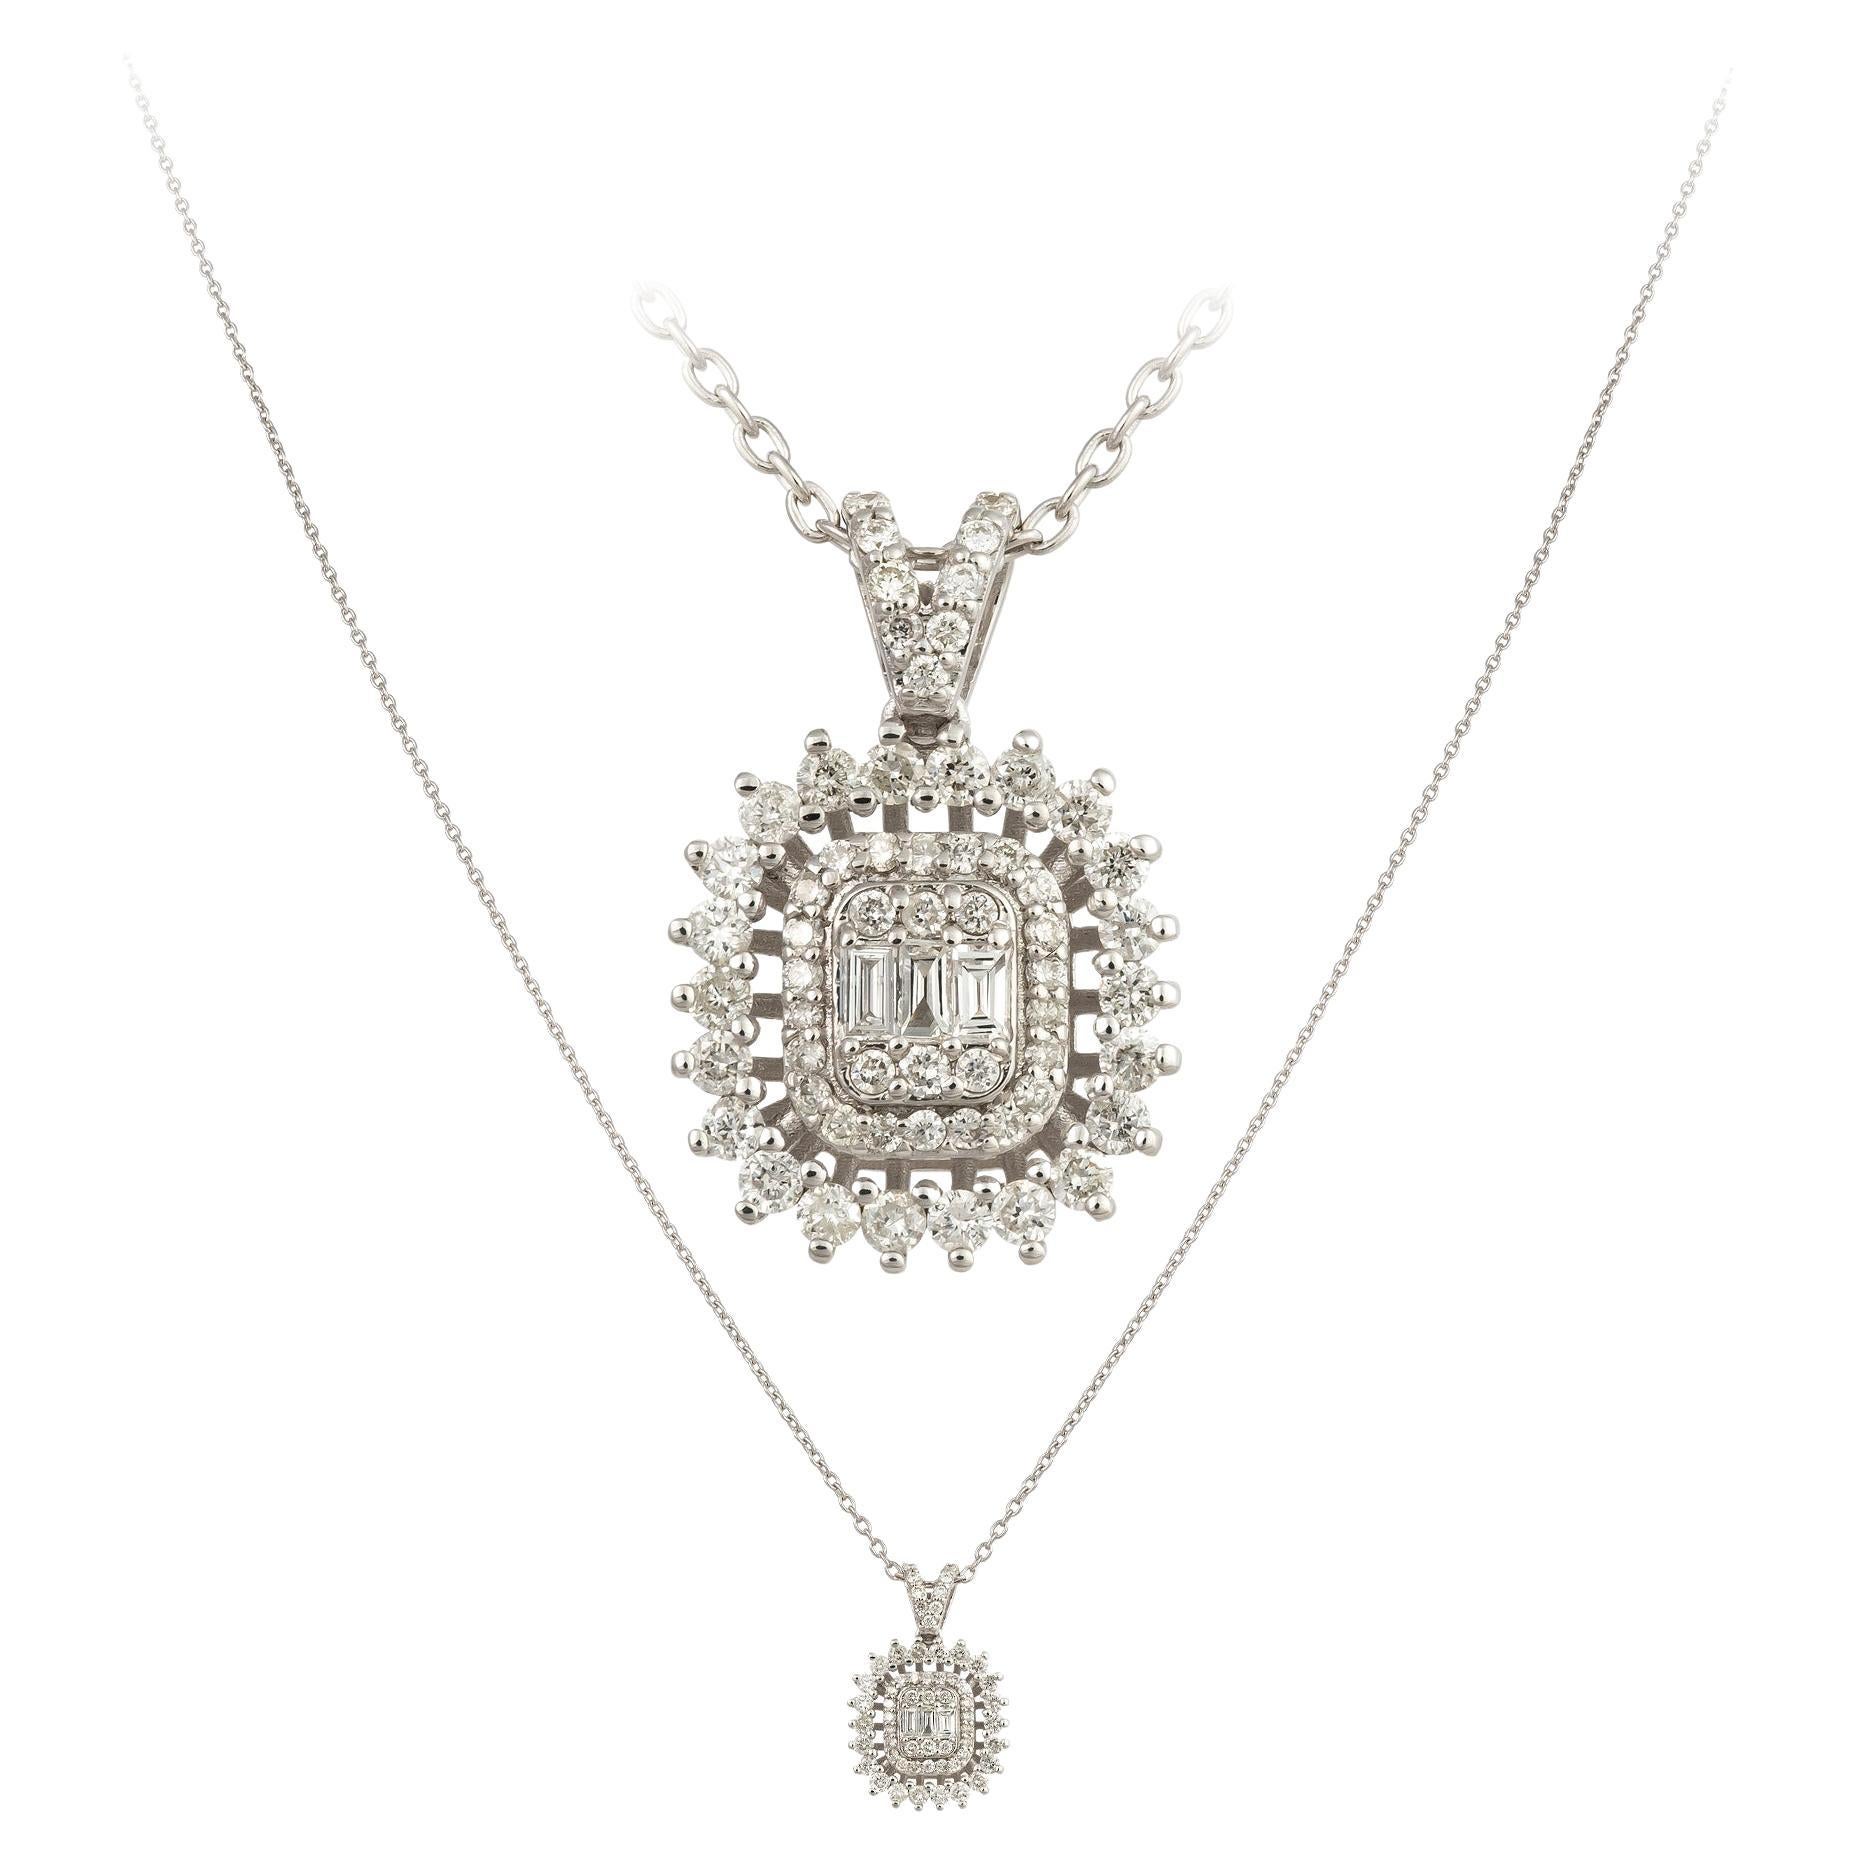 The Modernity White Gold 18K Necklace Diamond For Her